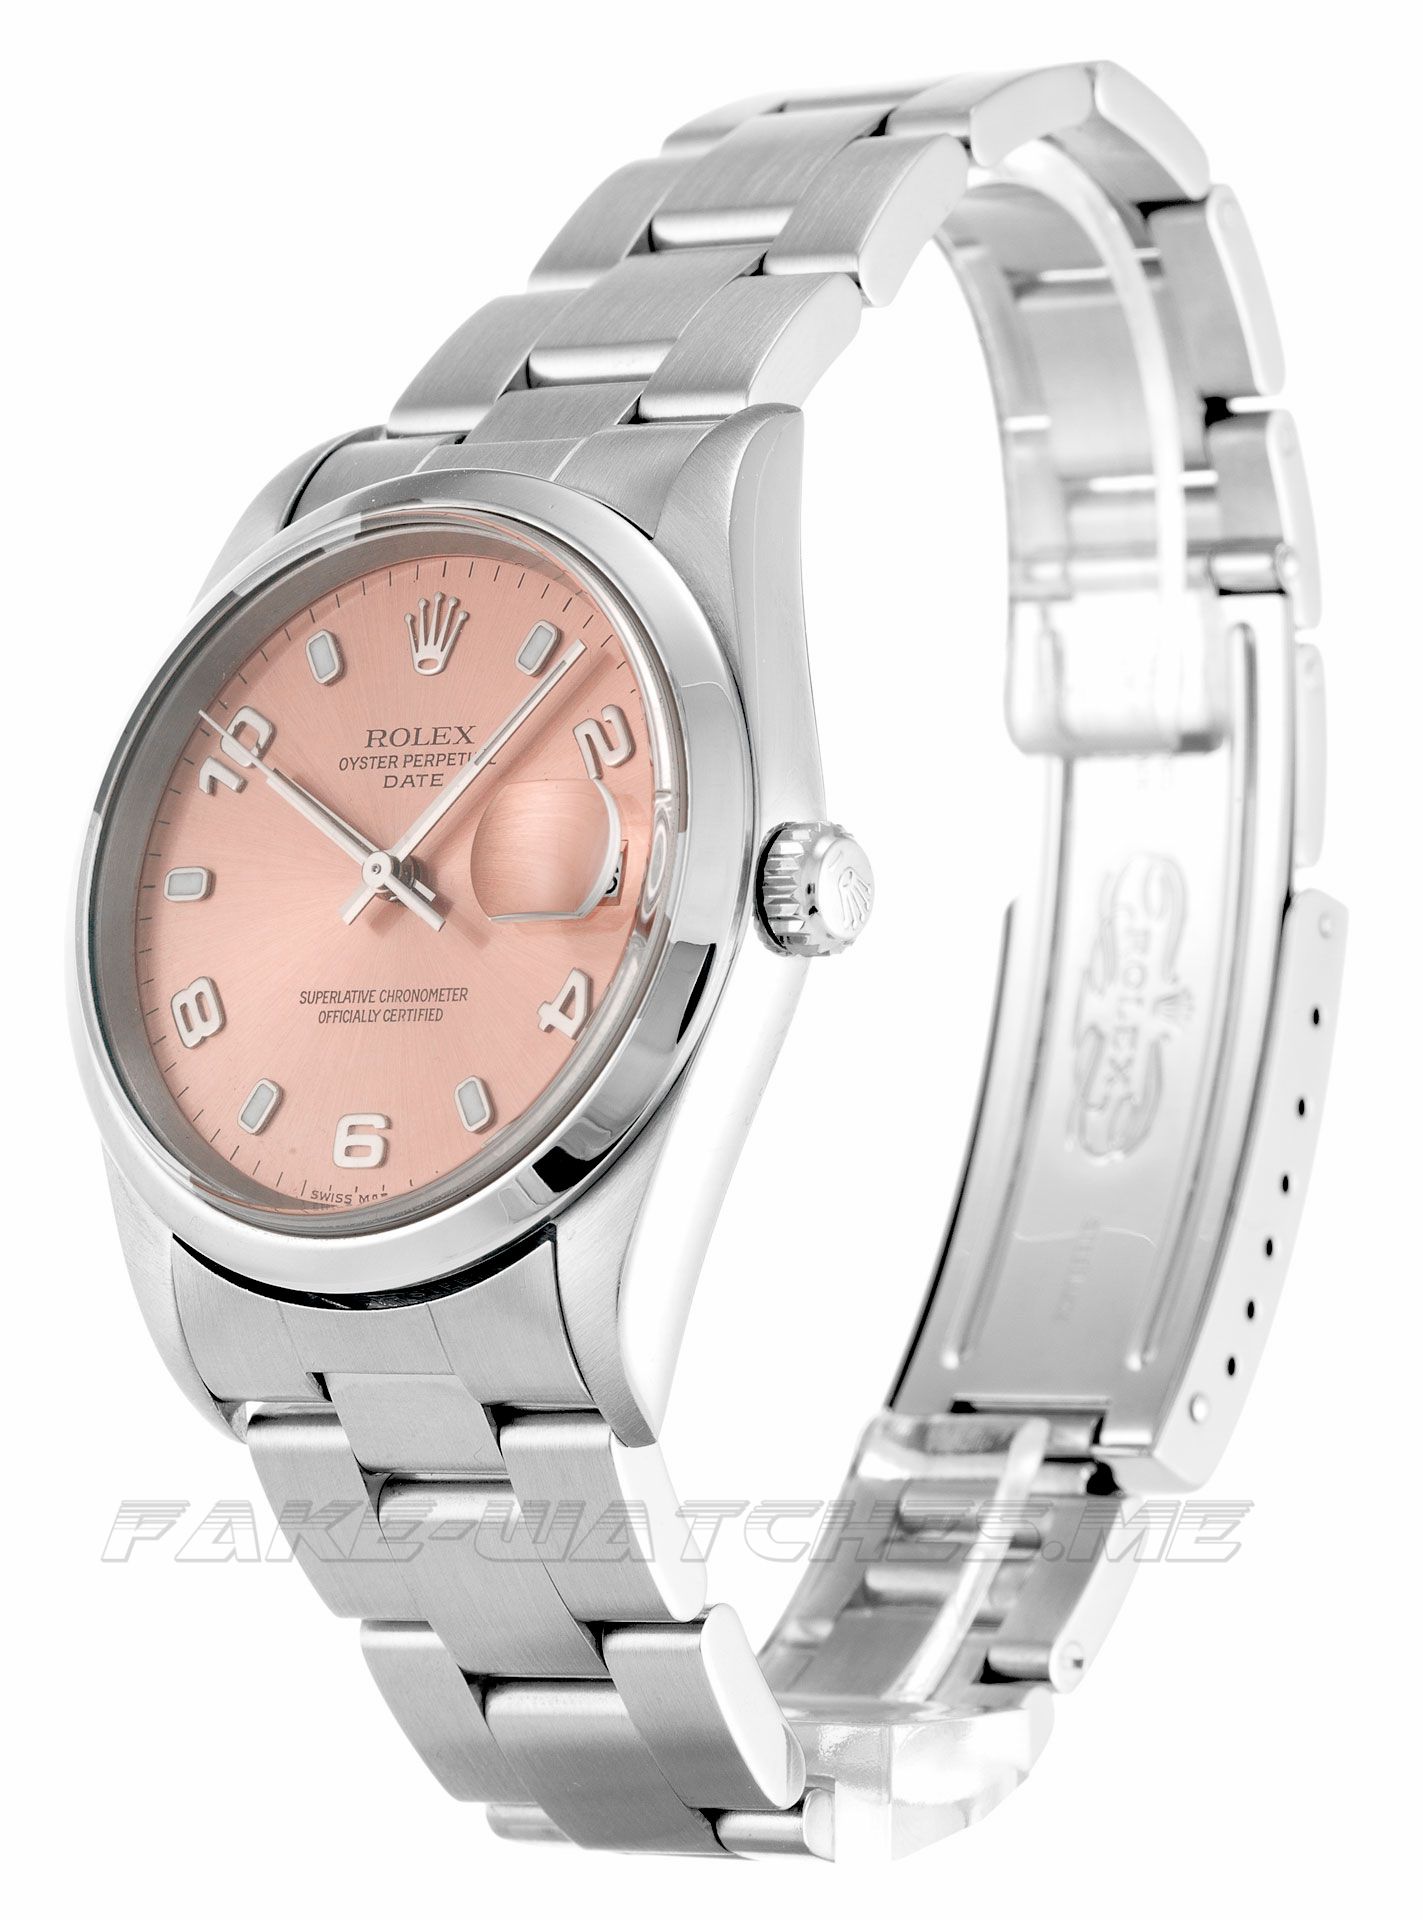 Rolex Oyster Perpetual Date Unisex Automatic 15200